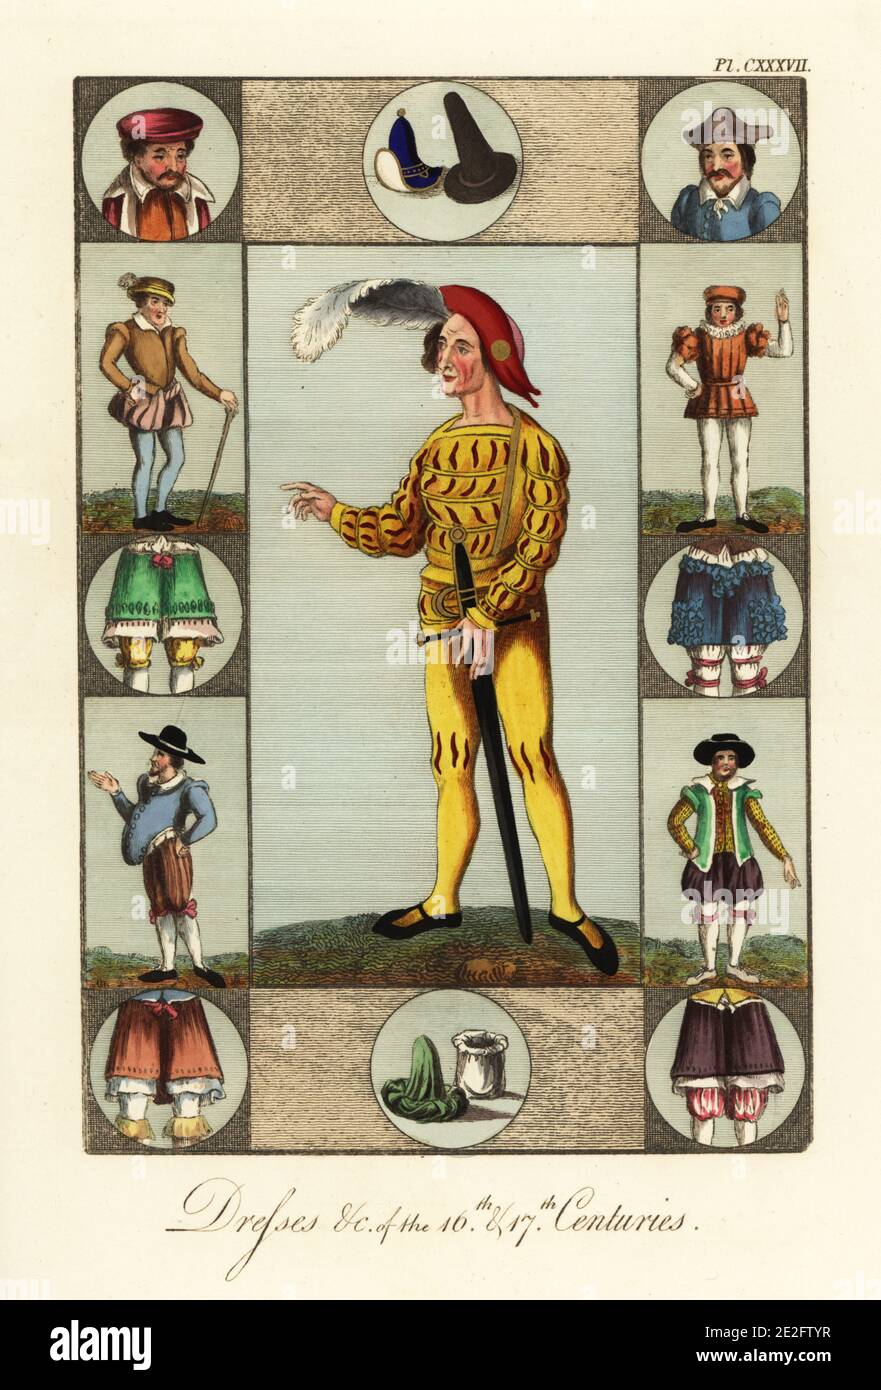 Man in makeup of lipstick and blusher wearing a yellow slashed doublet and hose with feather cap and sword from a painting in St. George’s Chapel at Windsor Castle. Heads and hats from John Bulwer’s Artificial Changeling, other hats, figures and frilled breeches from Harley MS 2014 by Randal Holmes. Dresses of the 16th and 17th centuries. Handcoloured engraving by Joseph Strutt from his Complete View of the Dress and Habits of the People of England, Henry Bohn, London, 1842. Stock Photo